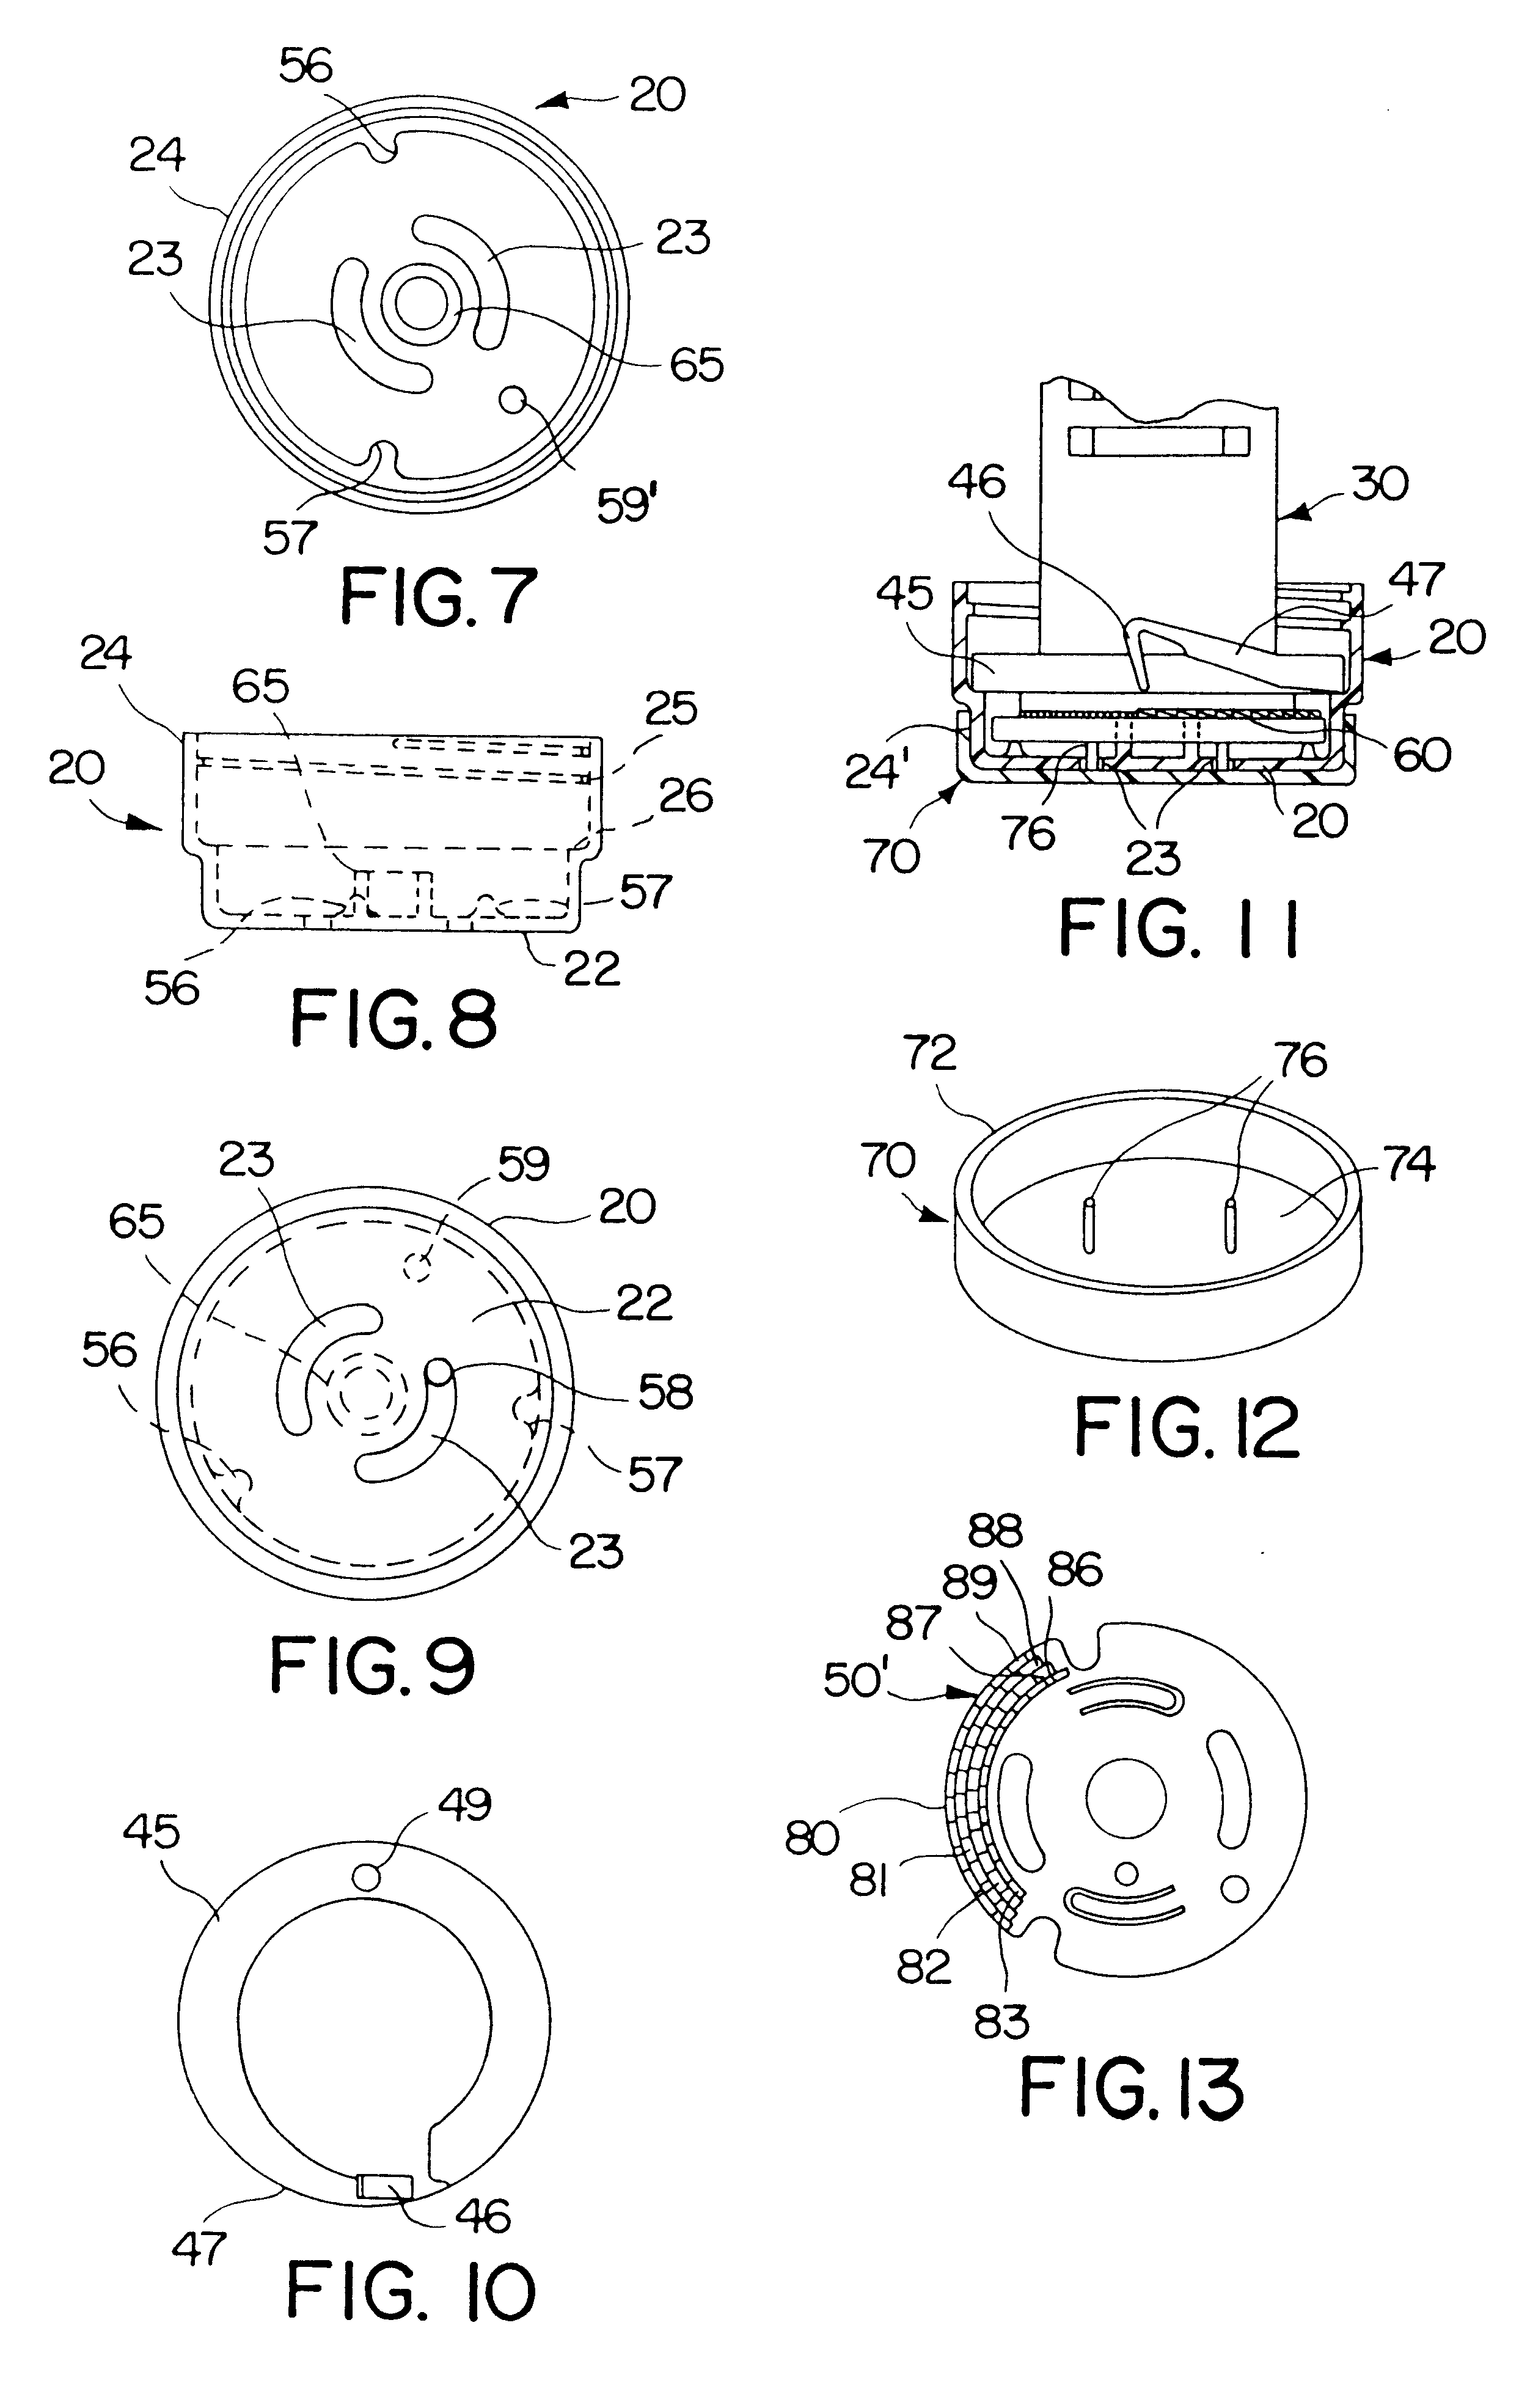 Filter use limitation device for liquid containers